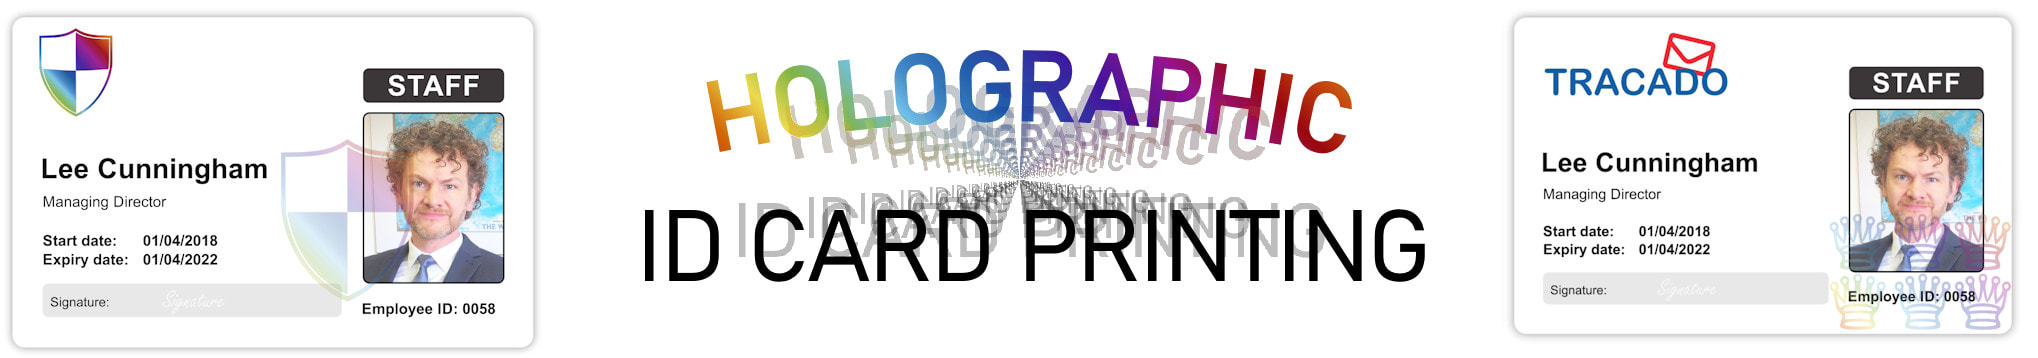 Warrington staff employers company charity members security holographic ID card print service. Employee Identity cards with hologram or holograph security mark.